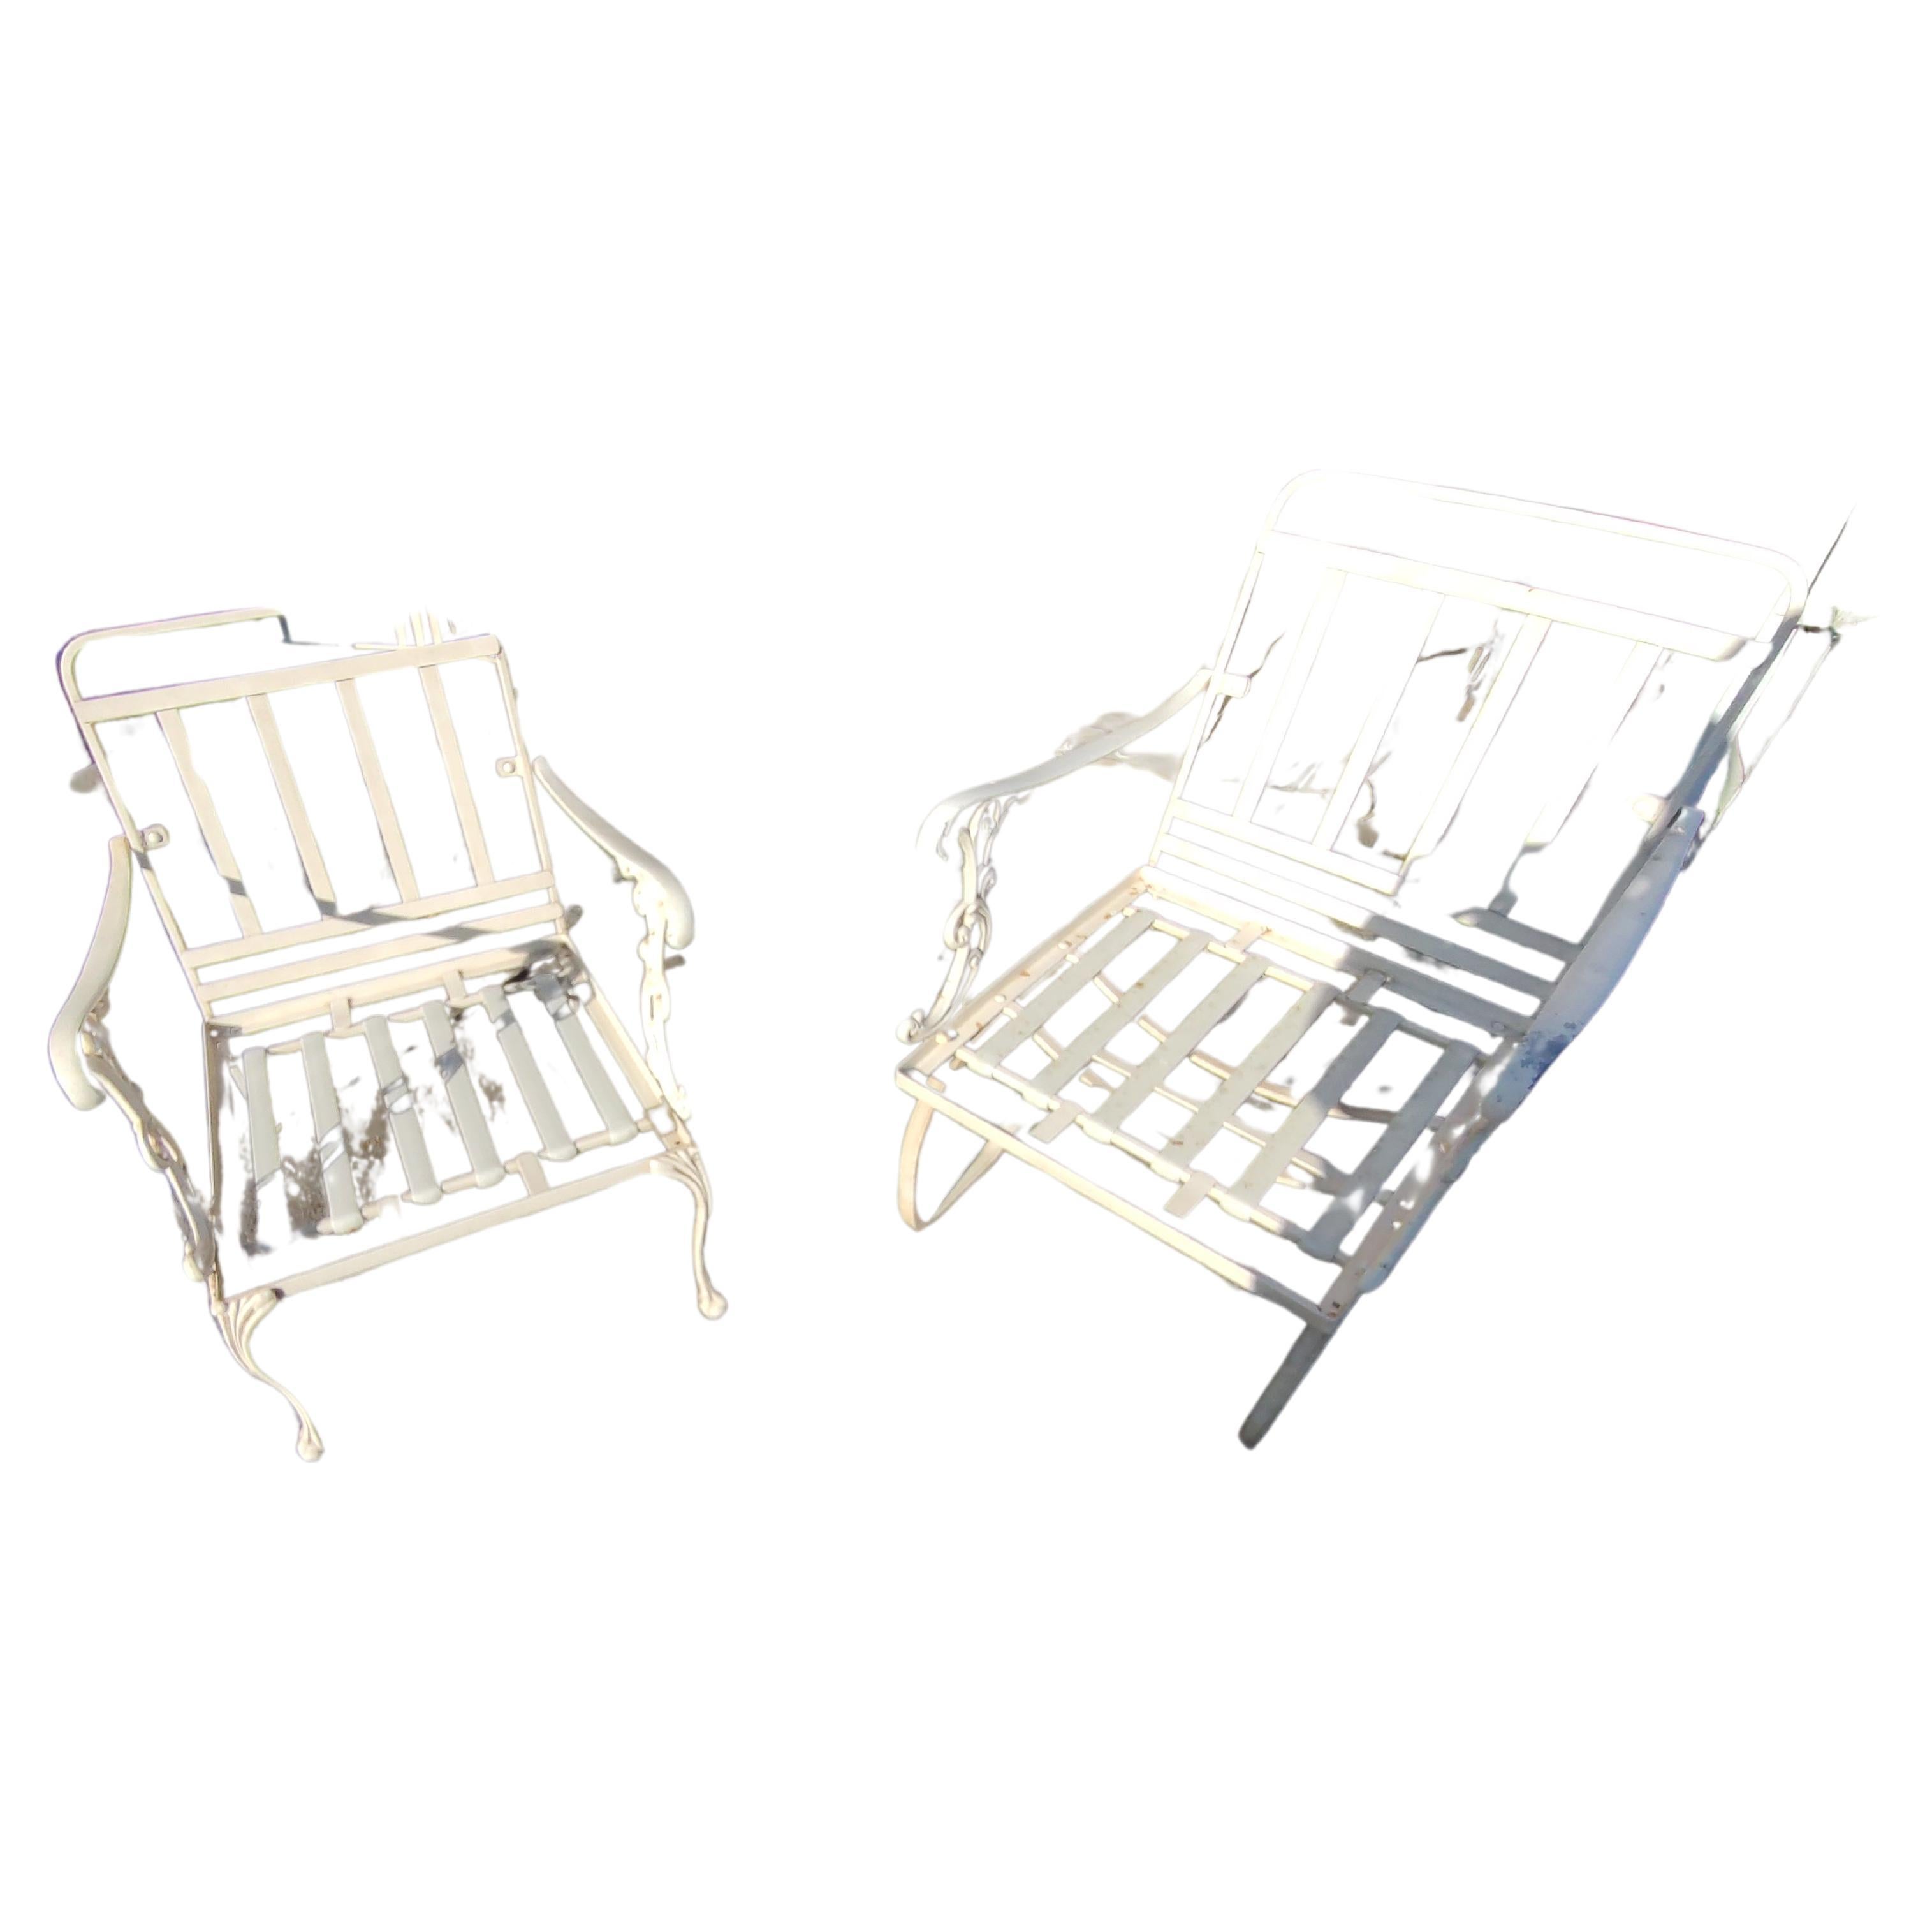 Fabulous pair of lightweight cast aluminum lounge chairs with full embossed cushions by Molla of Italy.
circa 1970 This set lived inside it's entirety. Powder coated off white it's part of a large set which is being listed piecemeal. Cushions are